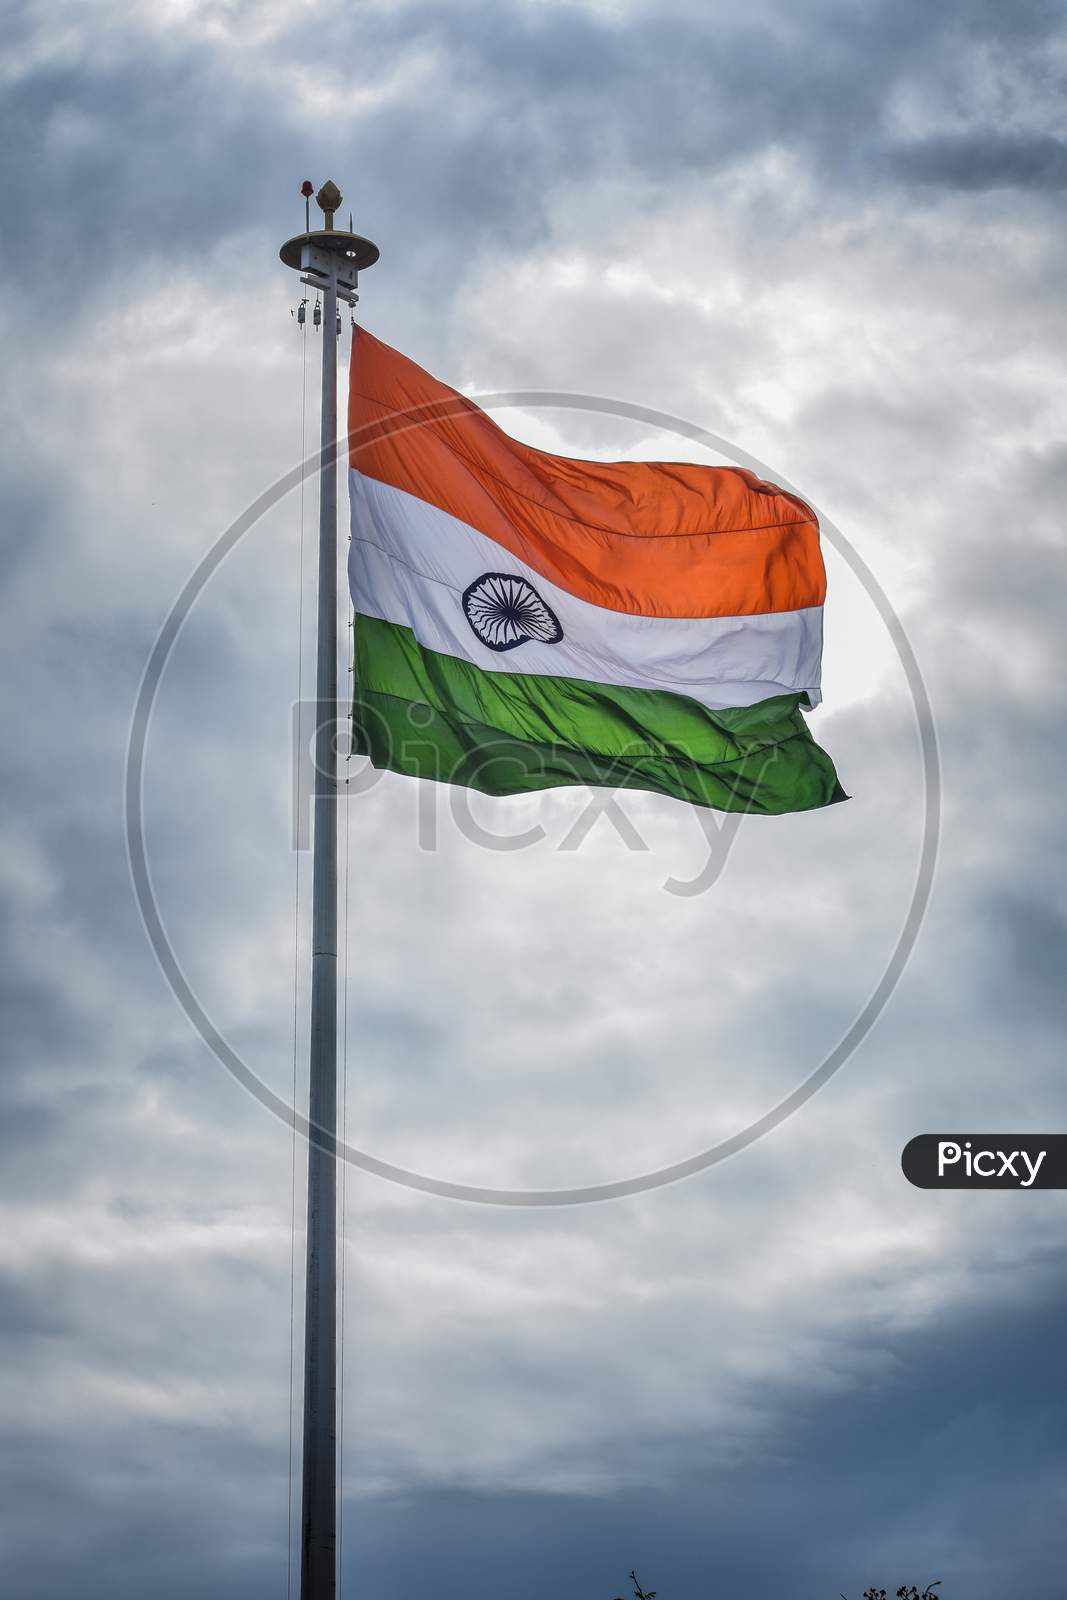 OUR GREAT NATIONAL FLAG